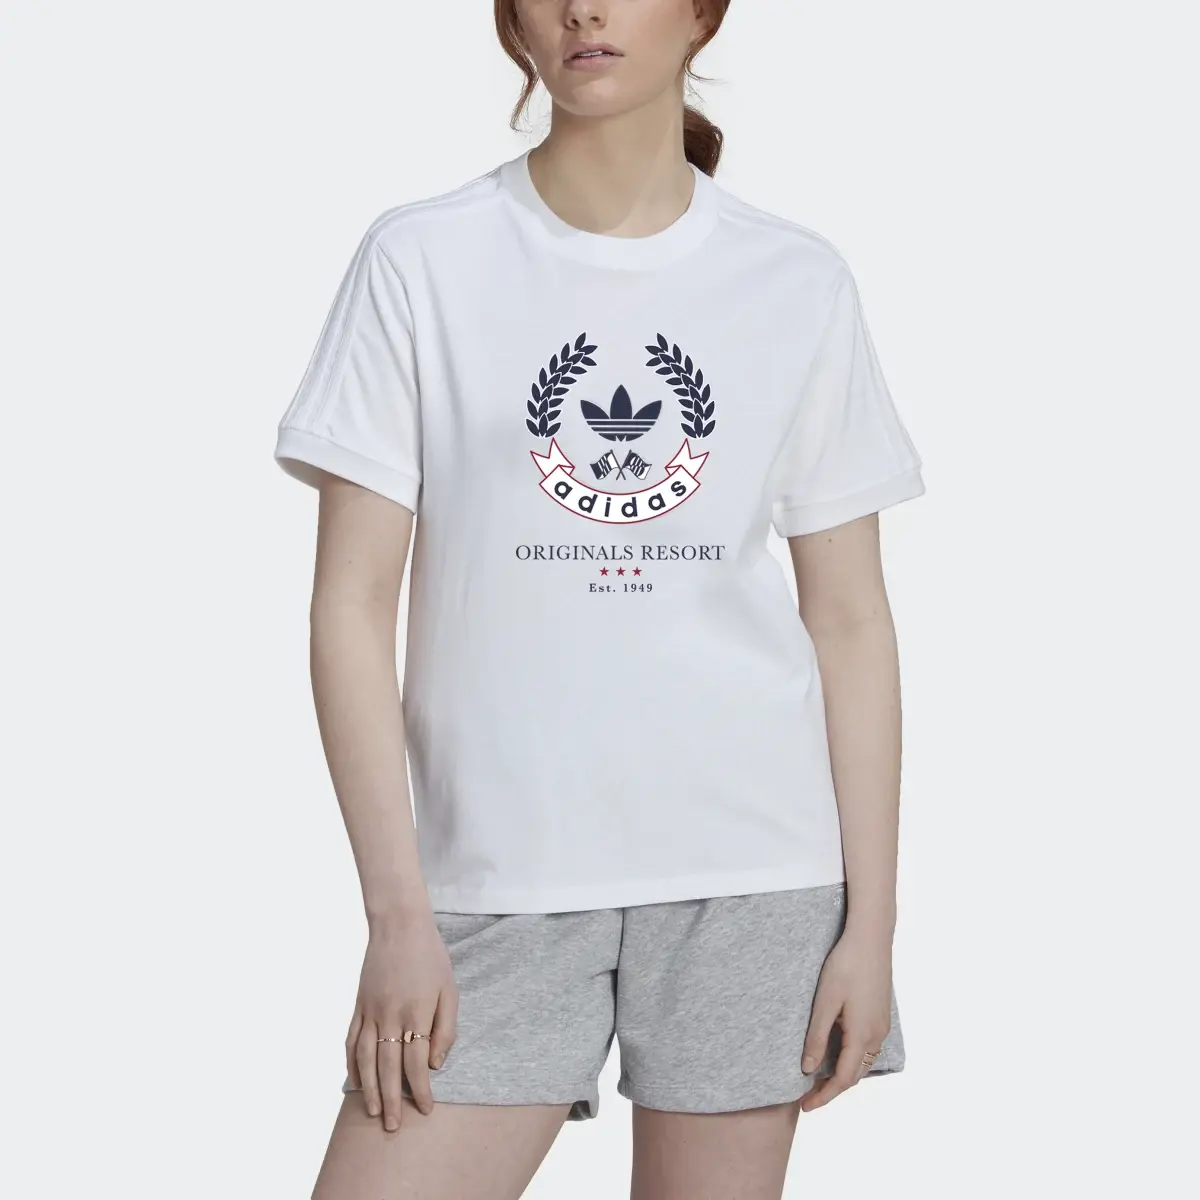 Adidas T-Shirt with Crest Graphic. 1